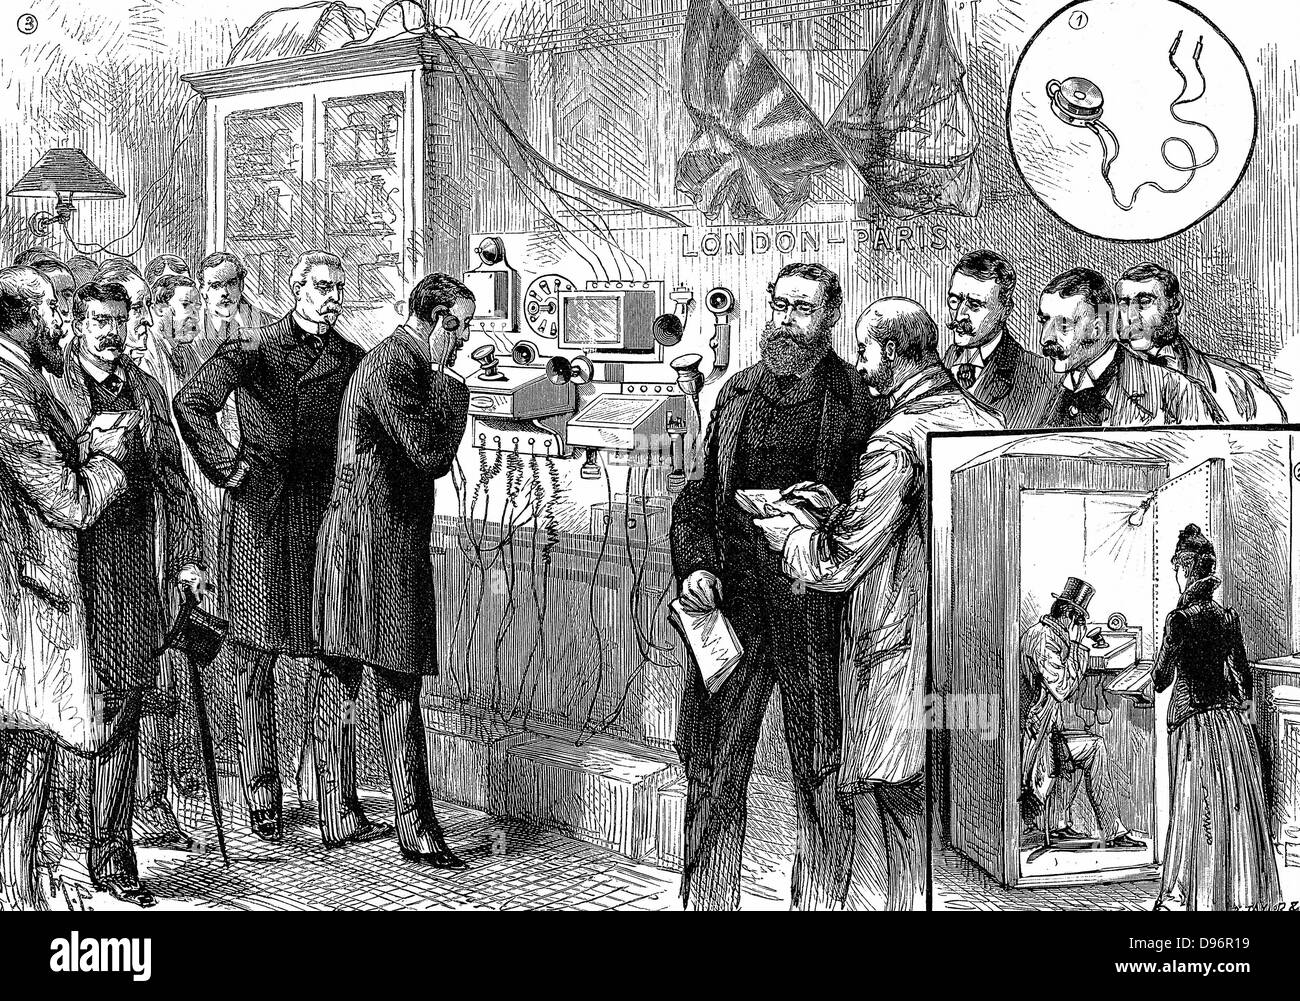 Opening of the Anglo-French telephone line. The first London to Paris telephone conversation at the General Post Office, London. Bell instruments were used at the London end. Wood engraving Paris 28 March 1891. Stock Photo